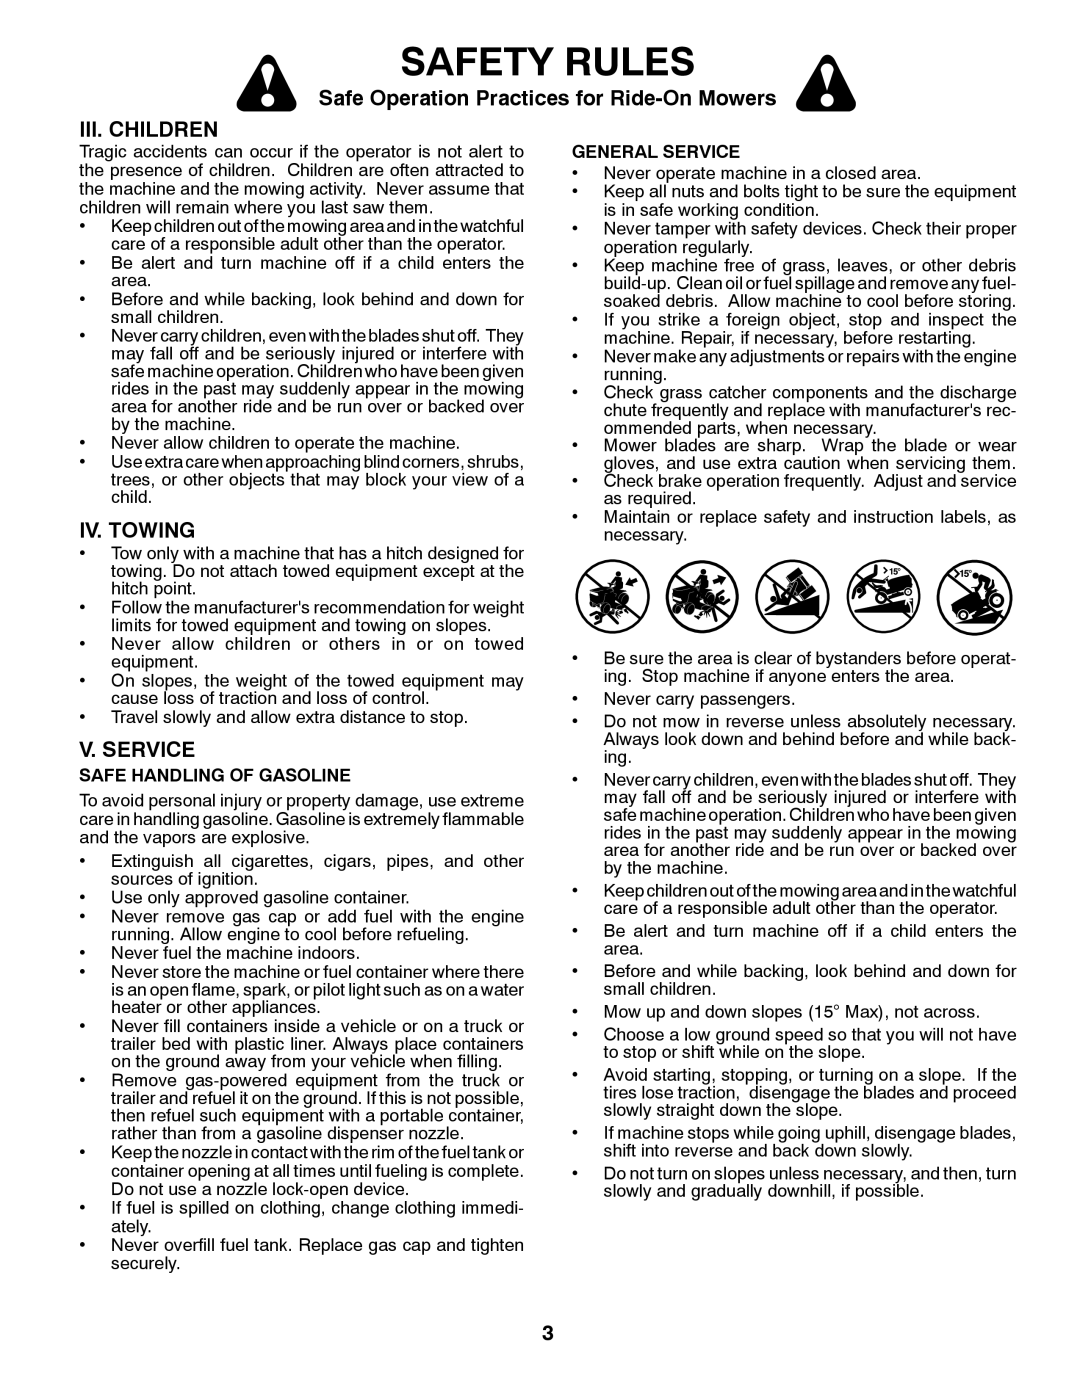 Husqvarna YTH26V54 Safety Rules, Safe Operation Practices for Ride-On Mowers, Iii. Children, Iv. Towing, V. Service 